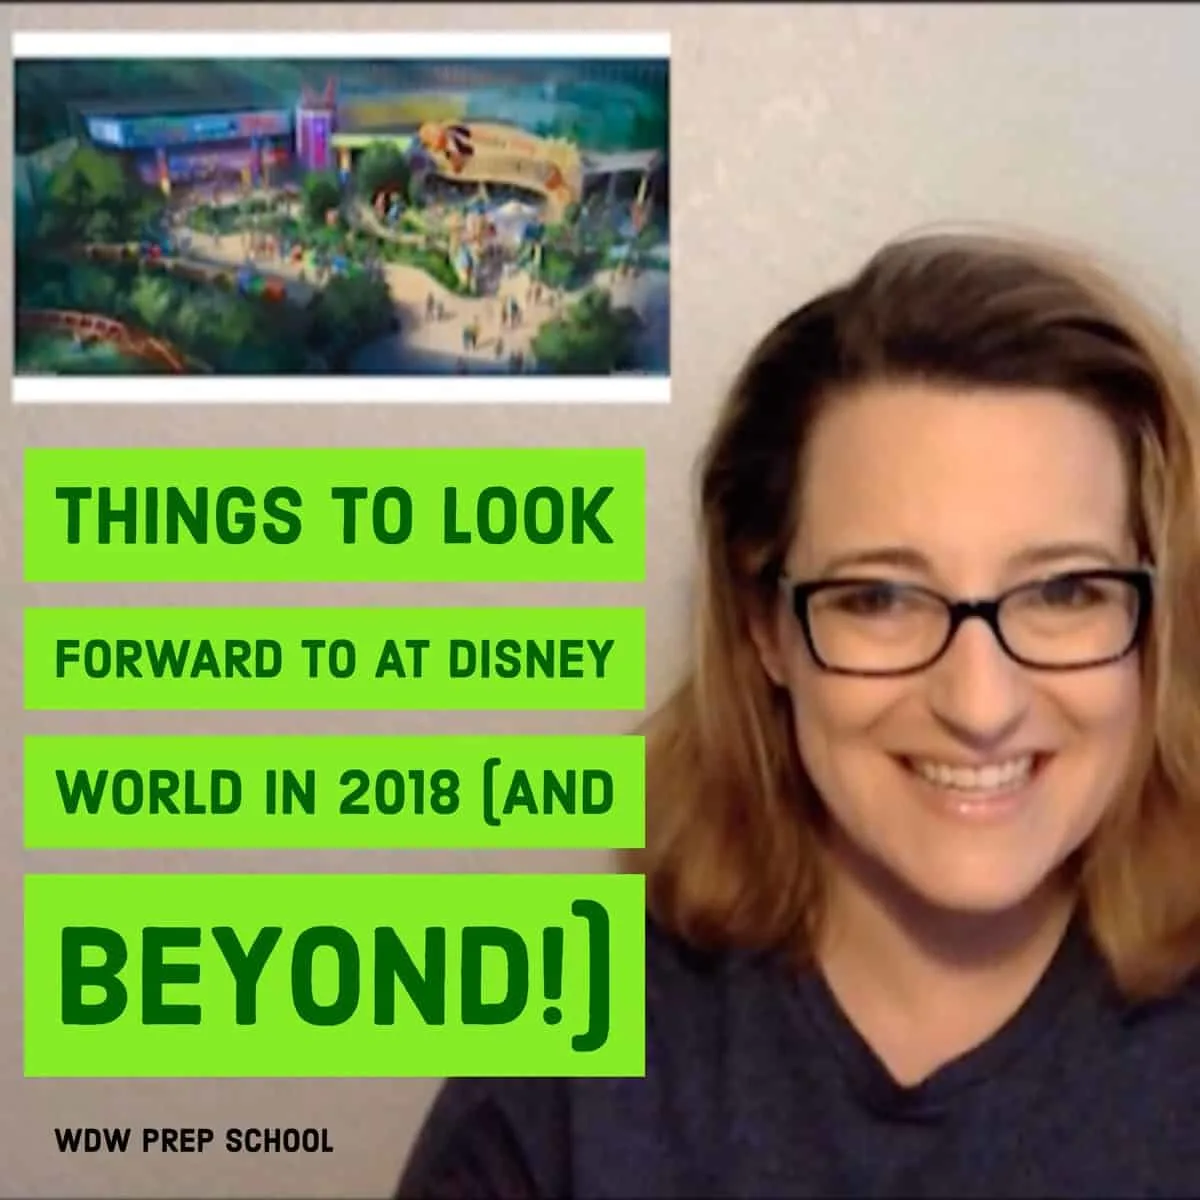 Things to look forward to at Disney World in 2018 and beyond – PREP165